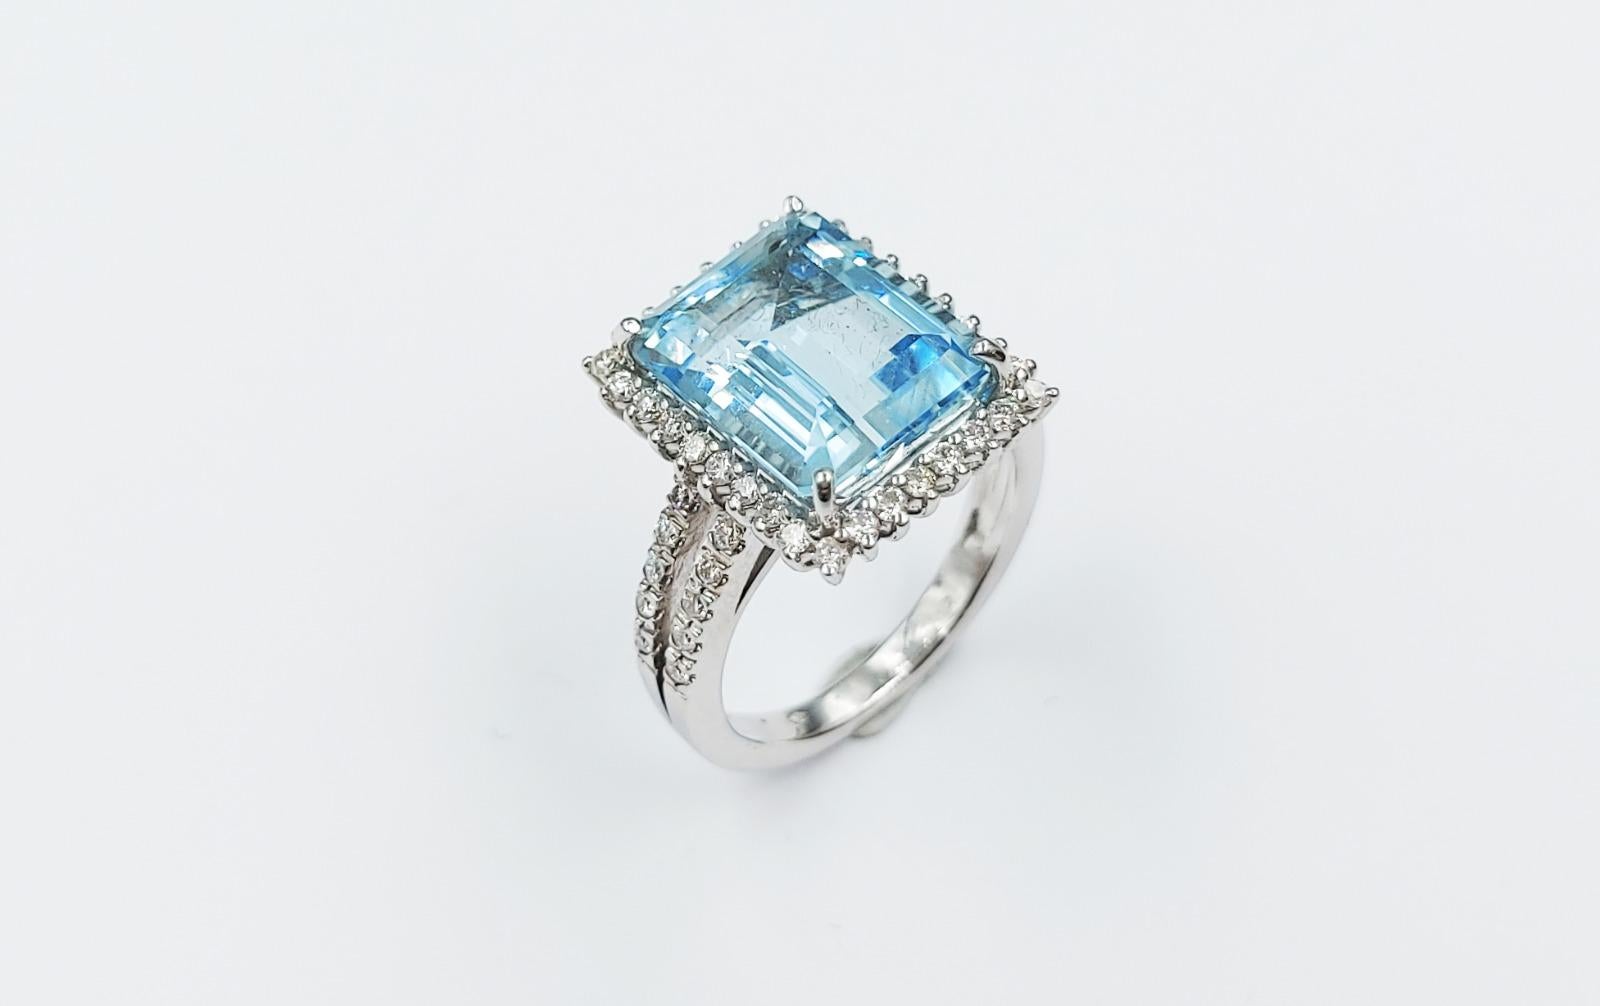 Contemporary Aquamarine Brilliant Cut Diamond 18 Carats White Gold Ring In New Condition For Sale In Marcianise, CE, IT